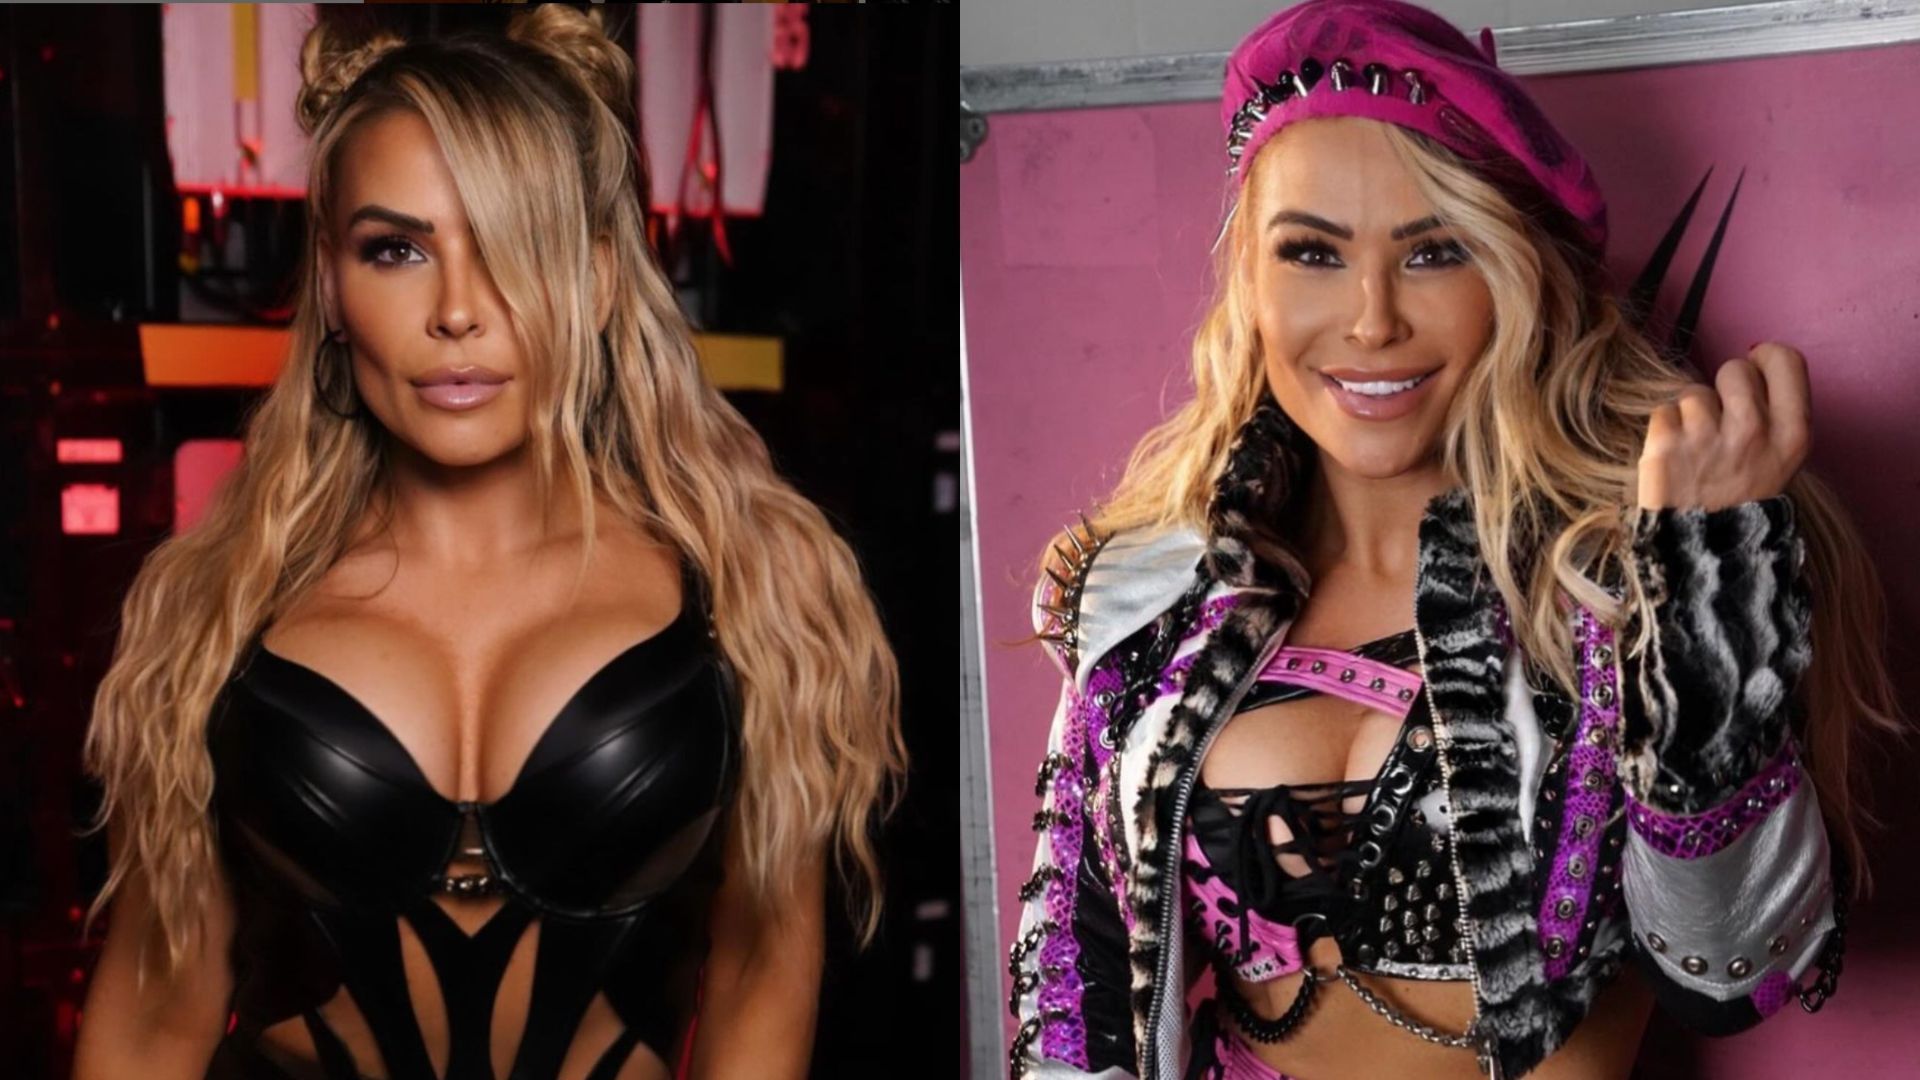 The veteran is currently on the RAW roster. [Photos: Natalya